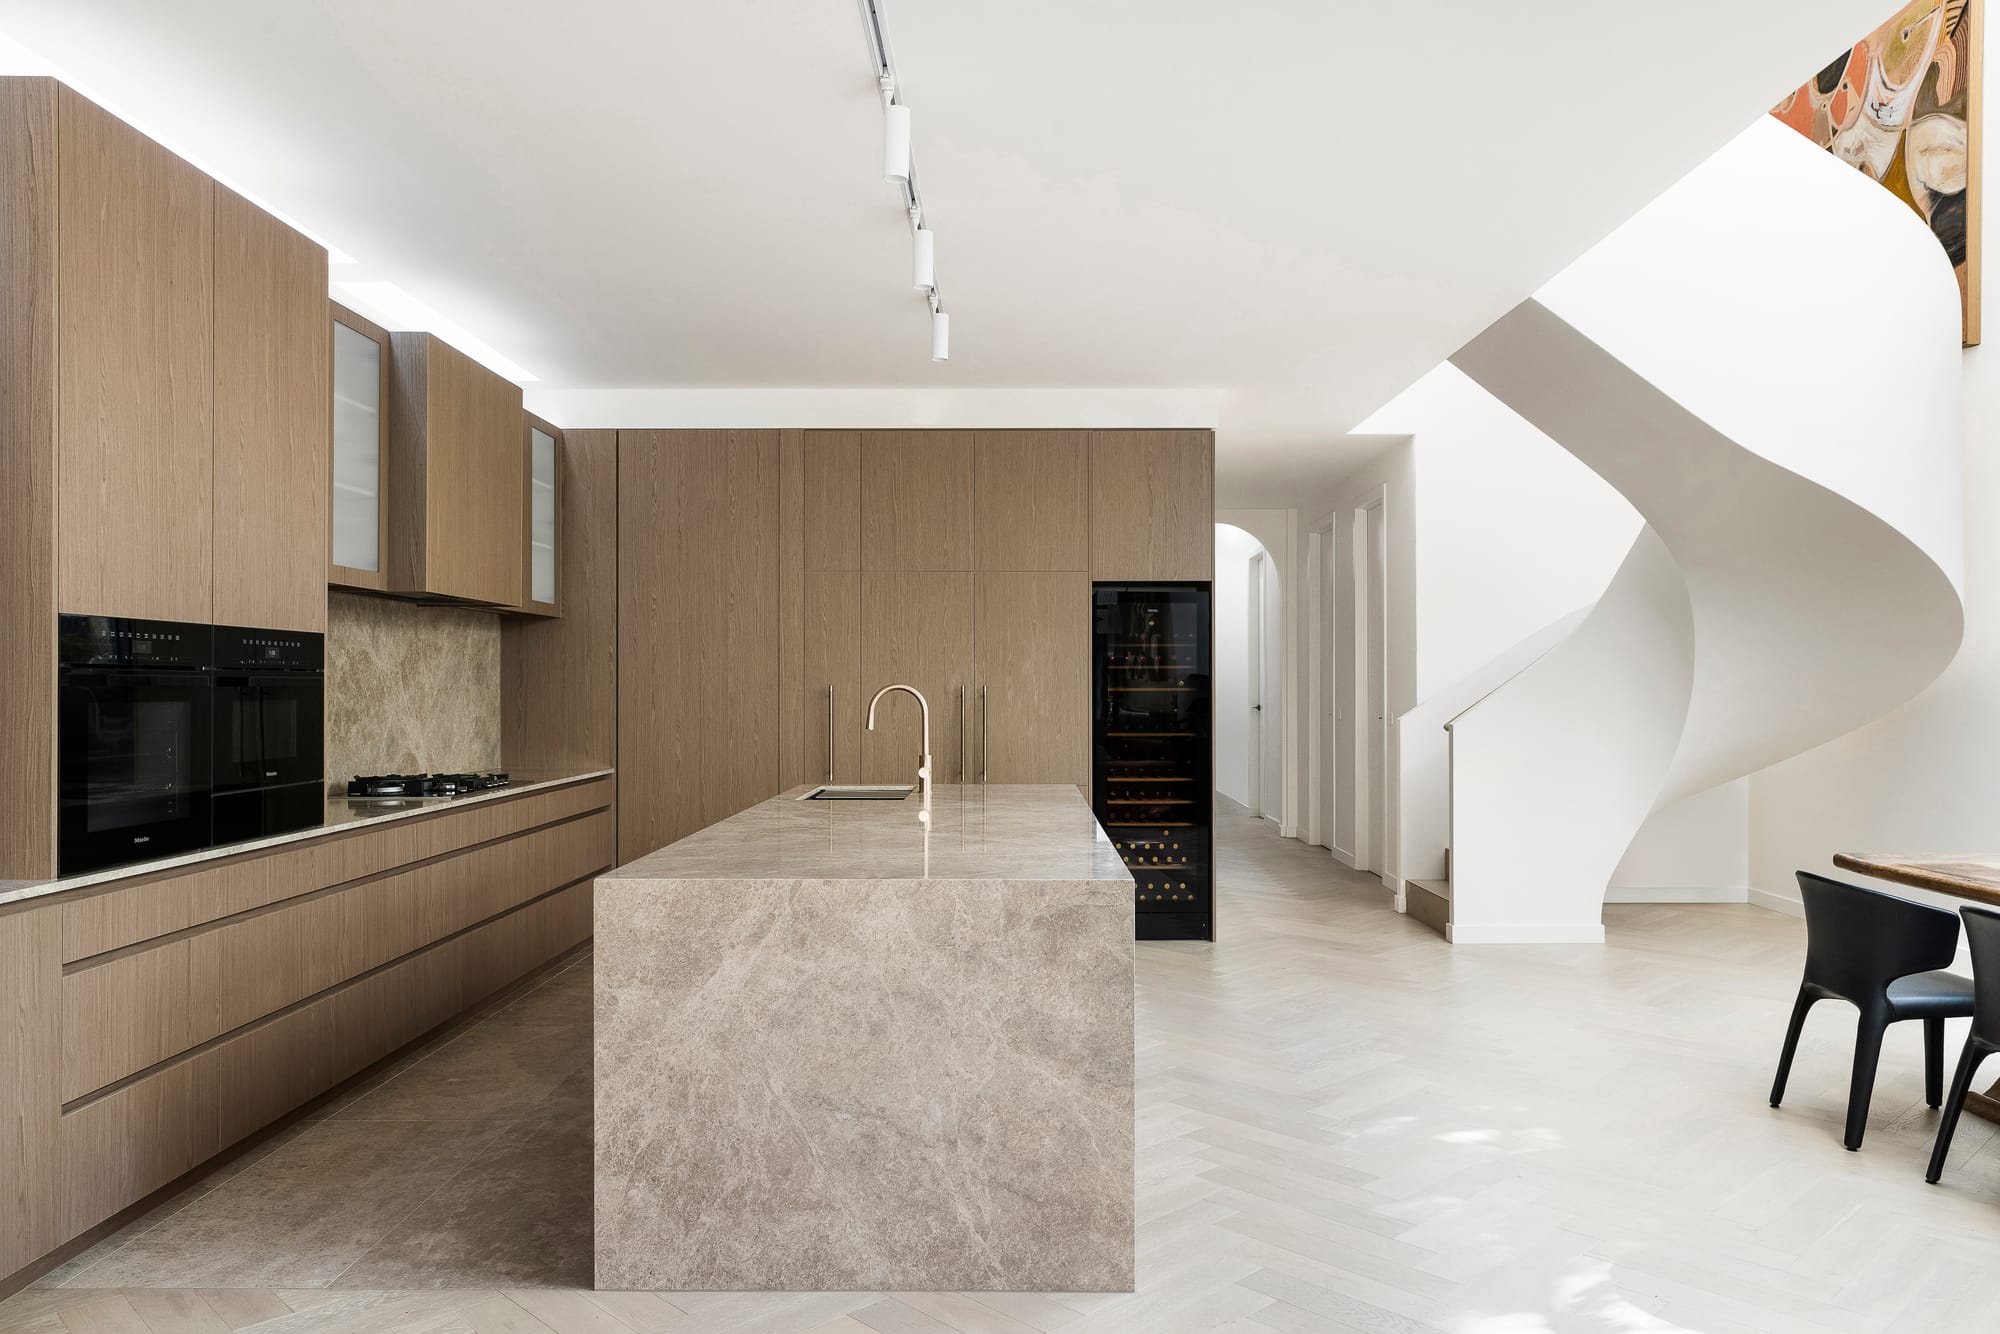 Goldsmith Residence by C.Kairouz Architects. Photography by Spacecraft. Residential kitchen with timber cabinetry and beige stone island bench and benchtops. Pale timber herringbone floors. White curved staircase to right. 